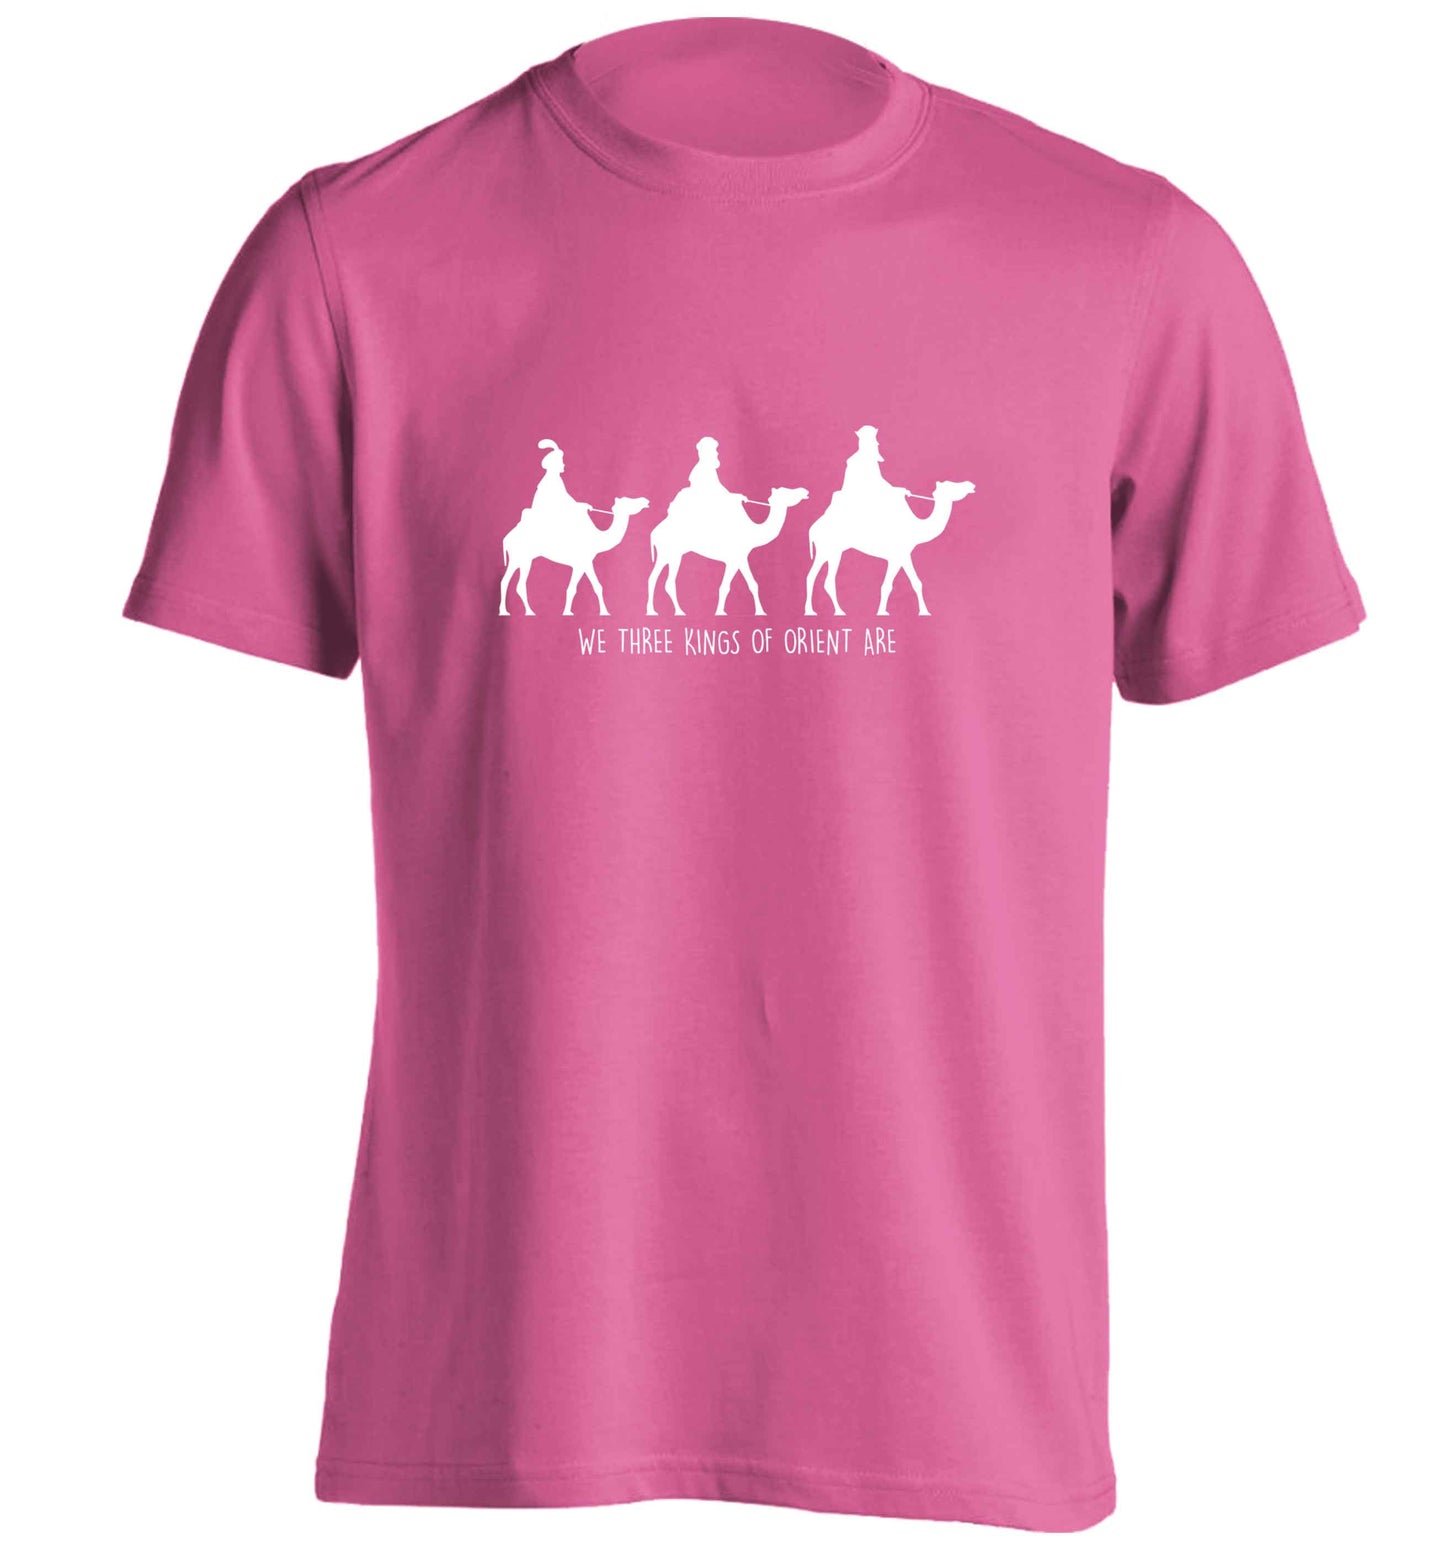 We three kings of orient are adults unisex pink Tshirt 2XL